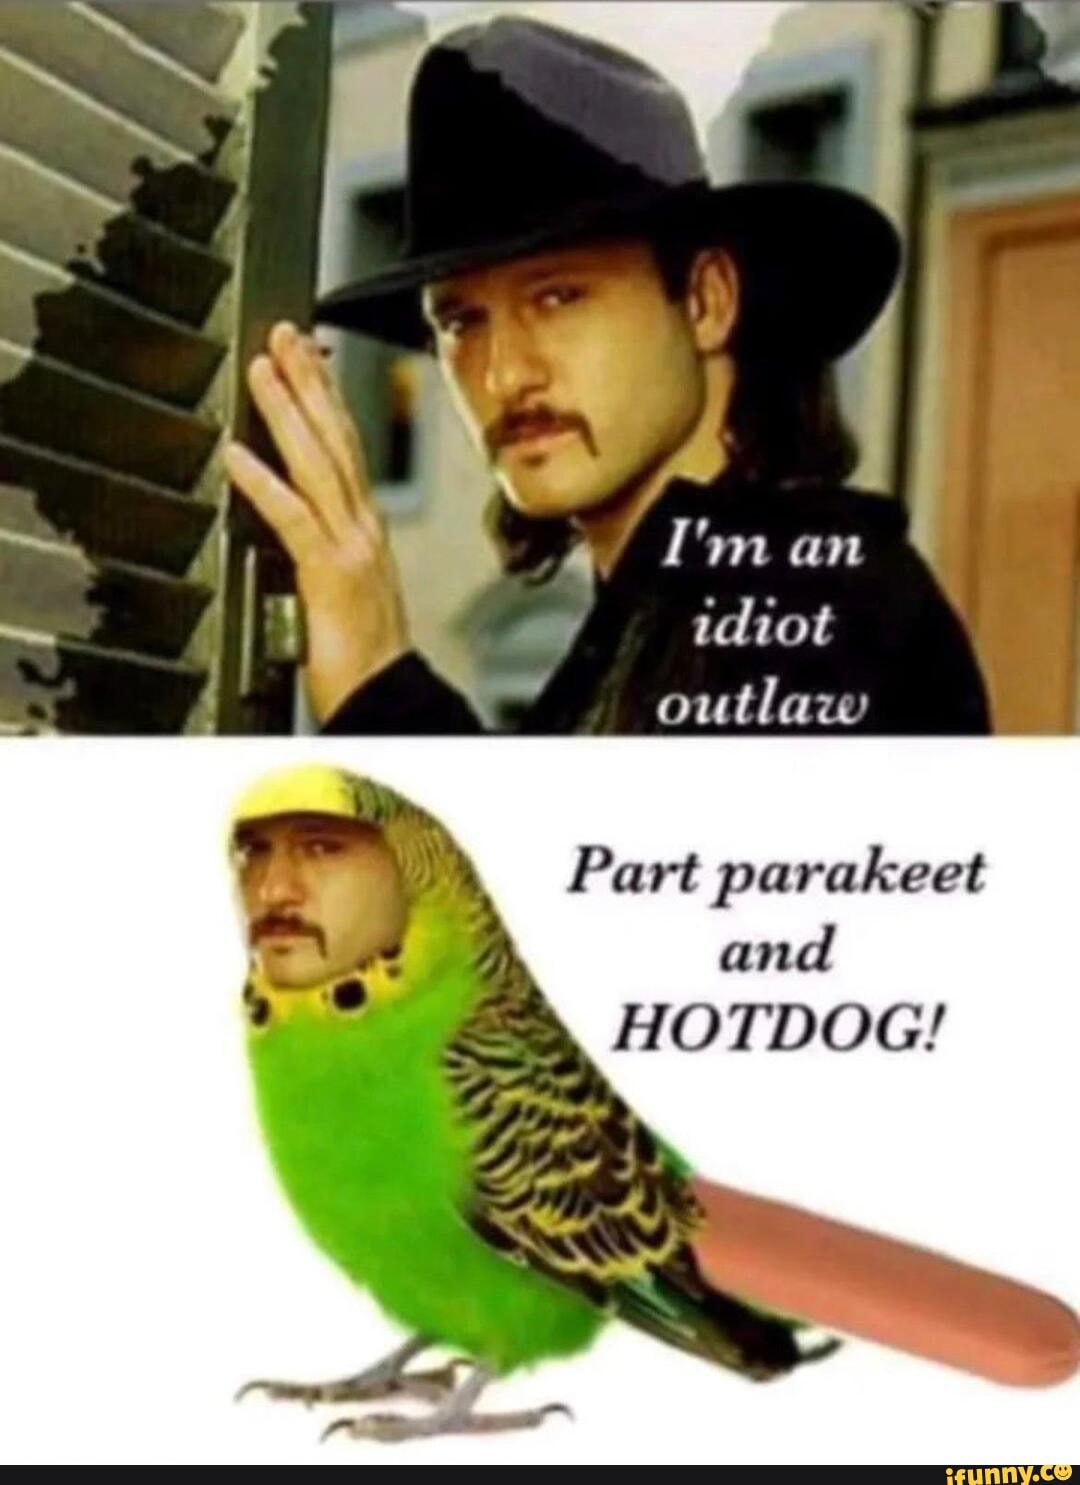 Indian outlaw meme